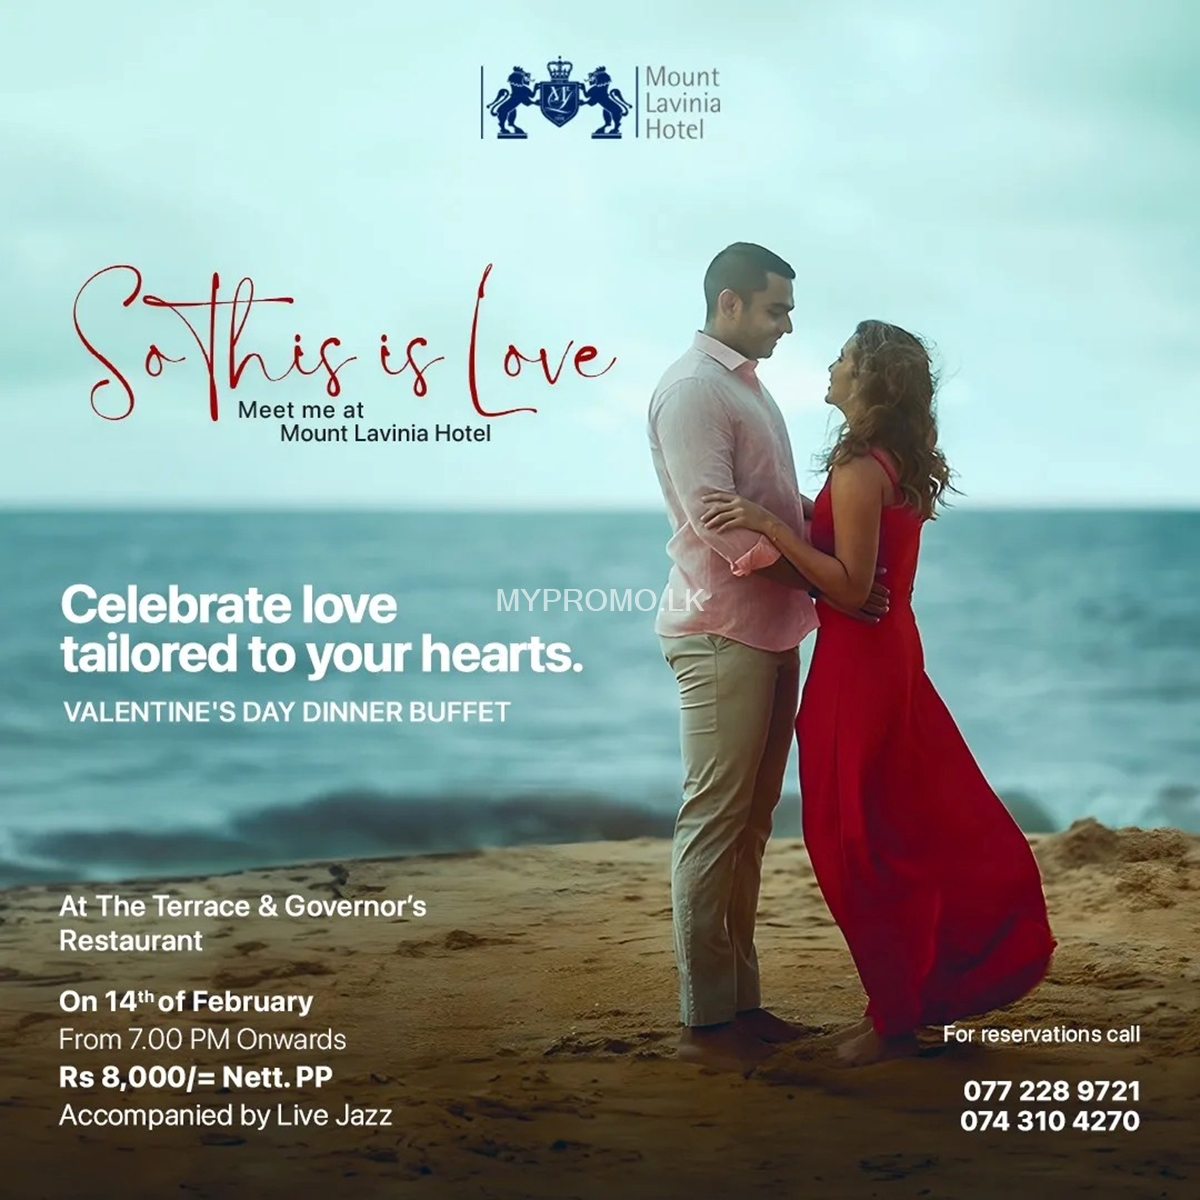 Celebrate Valentine's Day with Special Dinner Buffet at Mount Lavinia Hotel